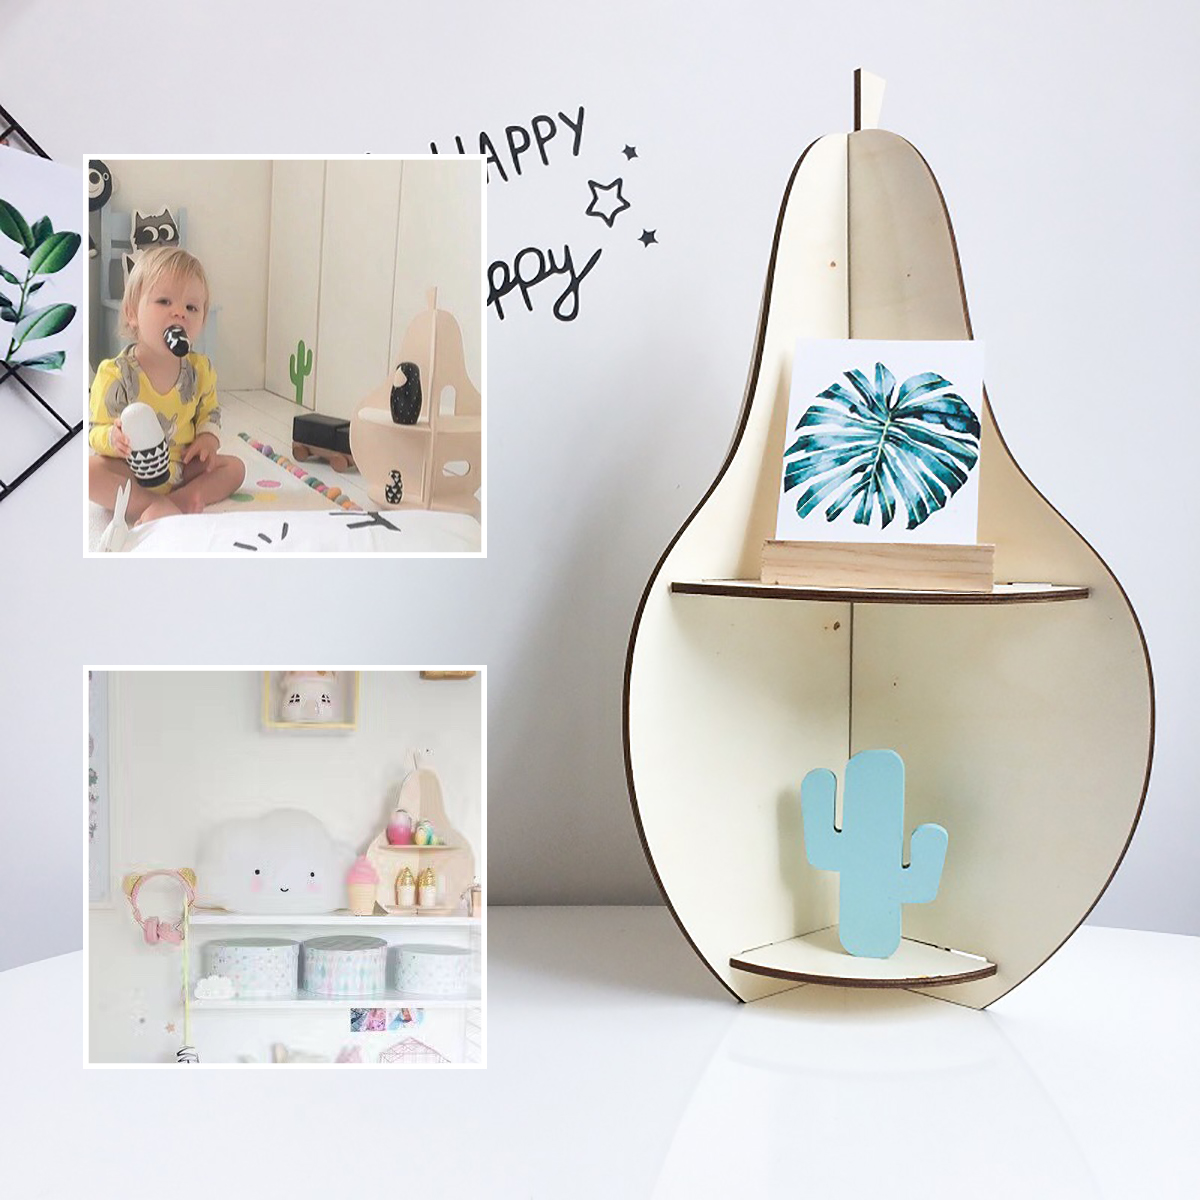 Wooden-Rack-Pear-shaped-Racks-Display-Craft-Shelf-Home-Decorations-Nordic-Style-Gift-1596581-1